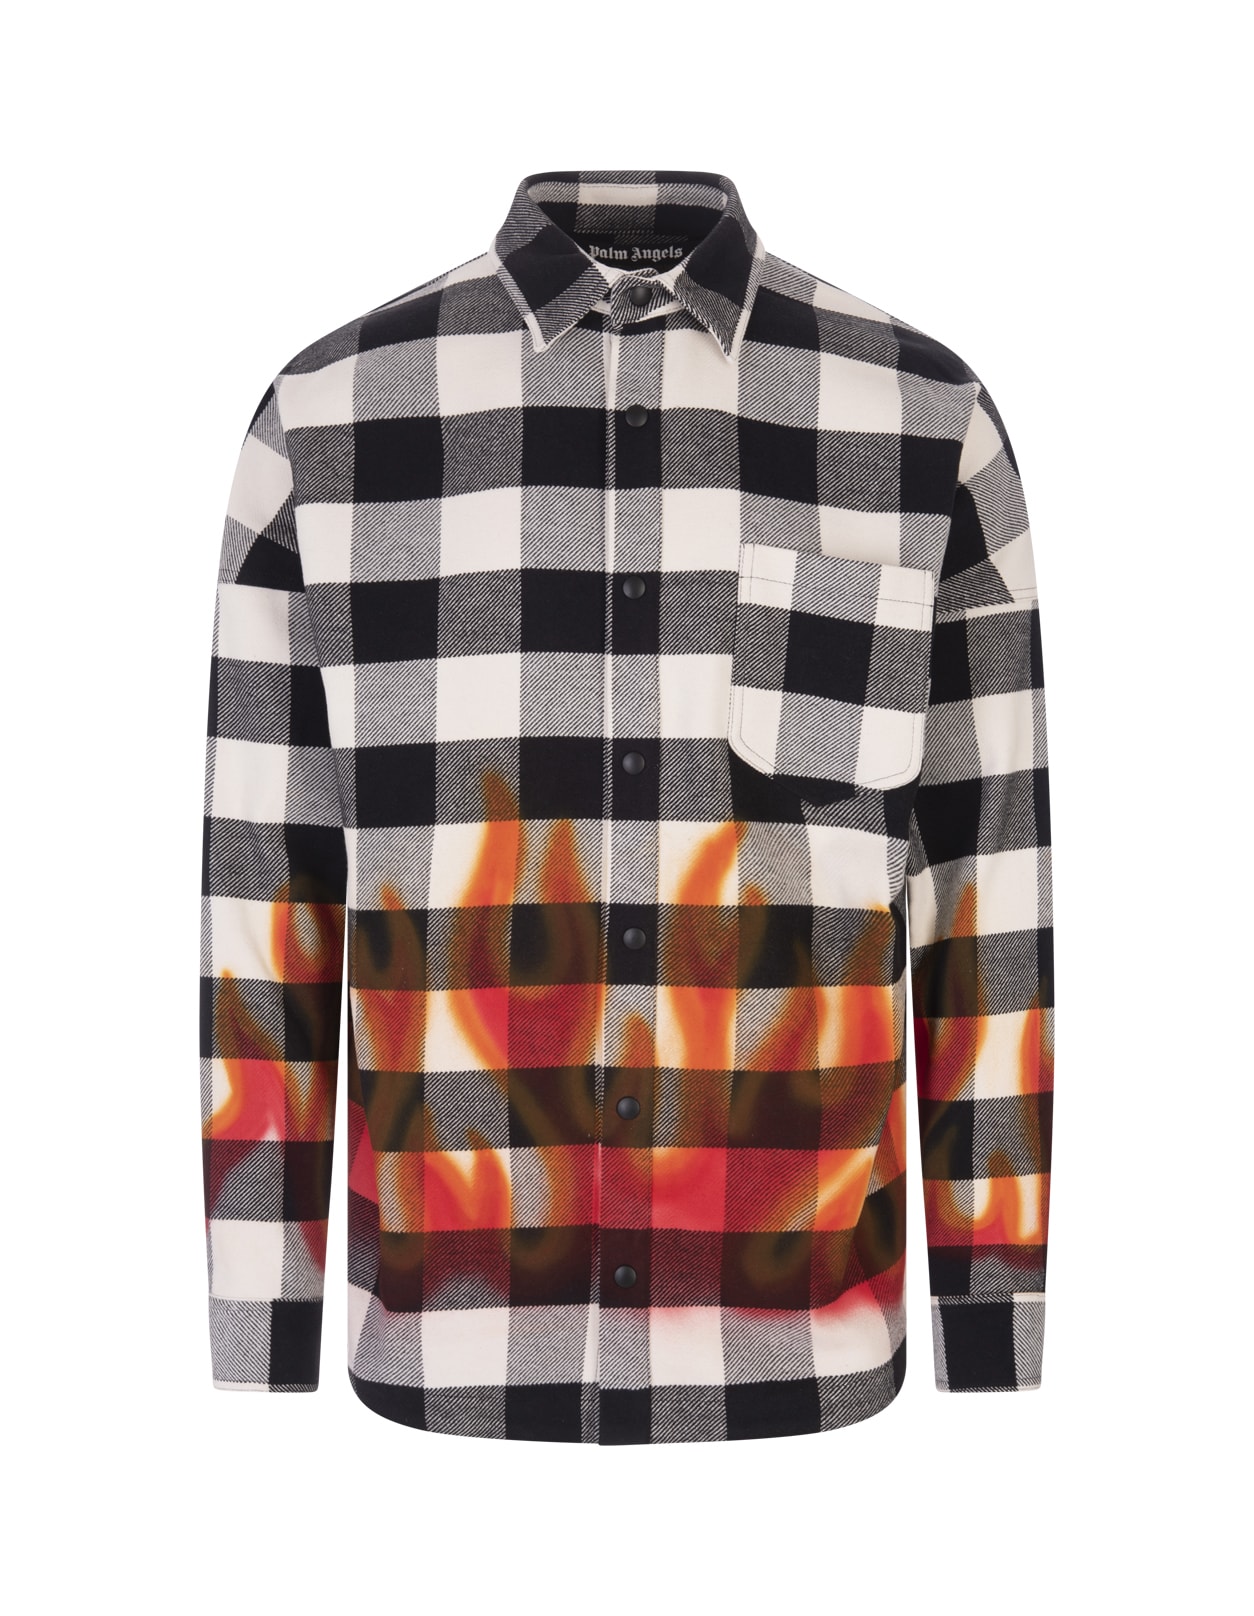 Palm Angels Man Black And White Check Cotton Overshirt With Burning Flames Print